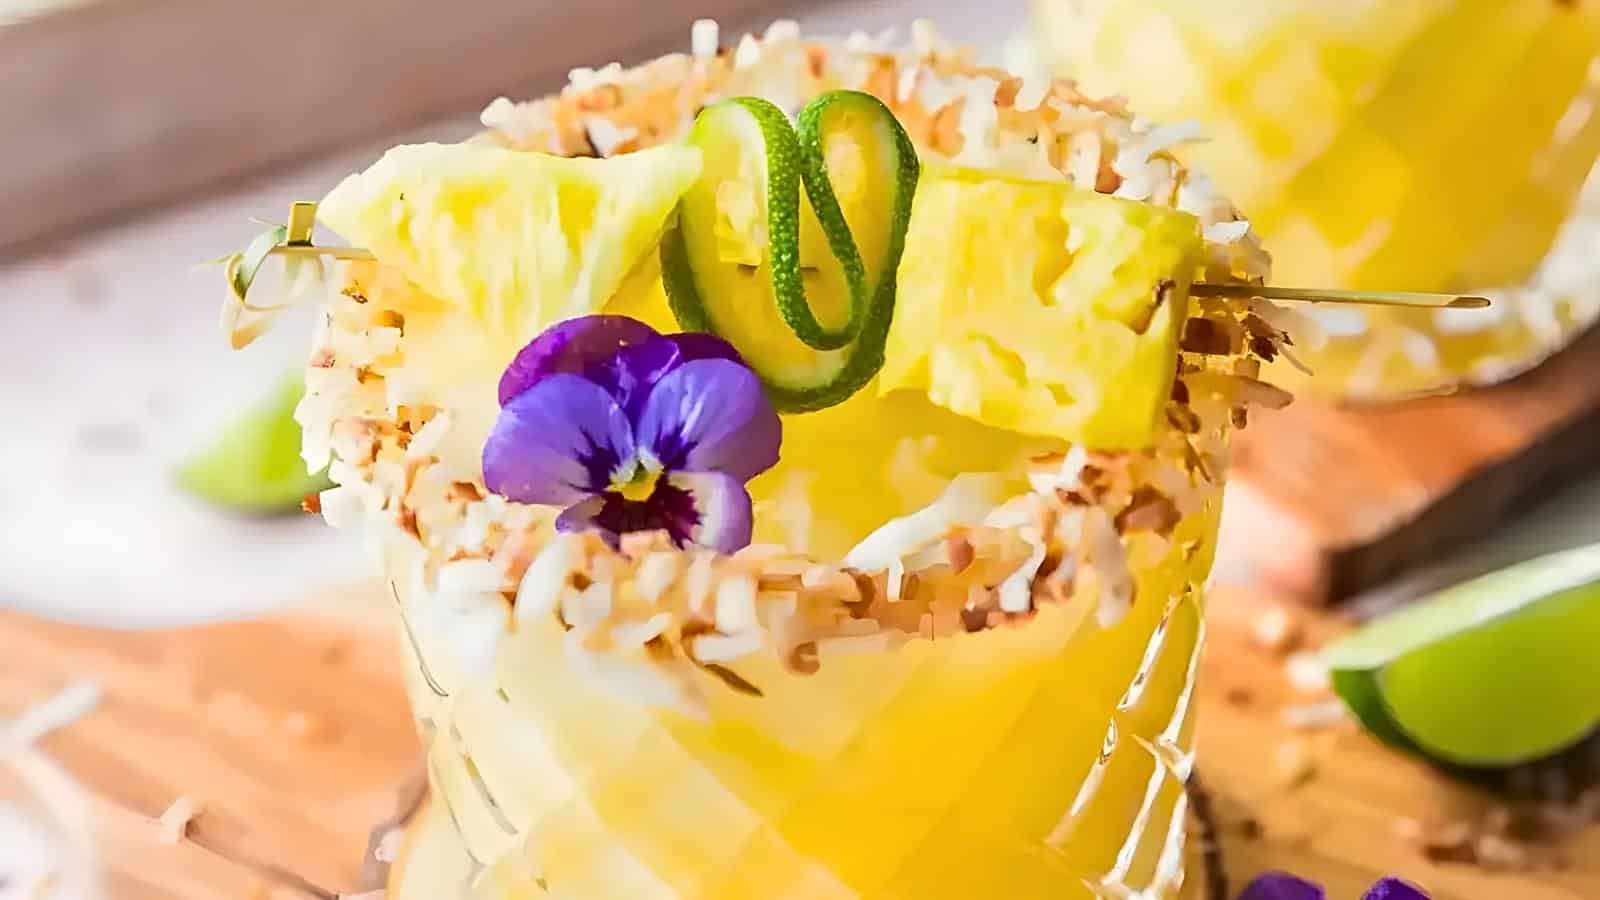 <p>This Pina Colada Pineapple Coconut Margarita is a tropical getaway in a glass. Blending coconut and pineapple with a hint of lime and tequila, it’s a creamy and delicious summer cocktail. Perfect for any beach-themed party!<br><strong>Get the Recipe: </strong><a href="https://www.sweetteaandthyme.com/pineapple-coconut-margaritas/?utm_source=msn&utm_medium=page&utm_campaign=msn" rel="noopener">Pina Colada Pineapple Coconut Margarita</a></p>